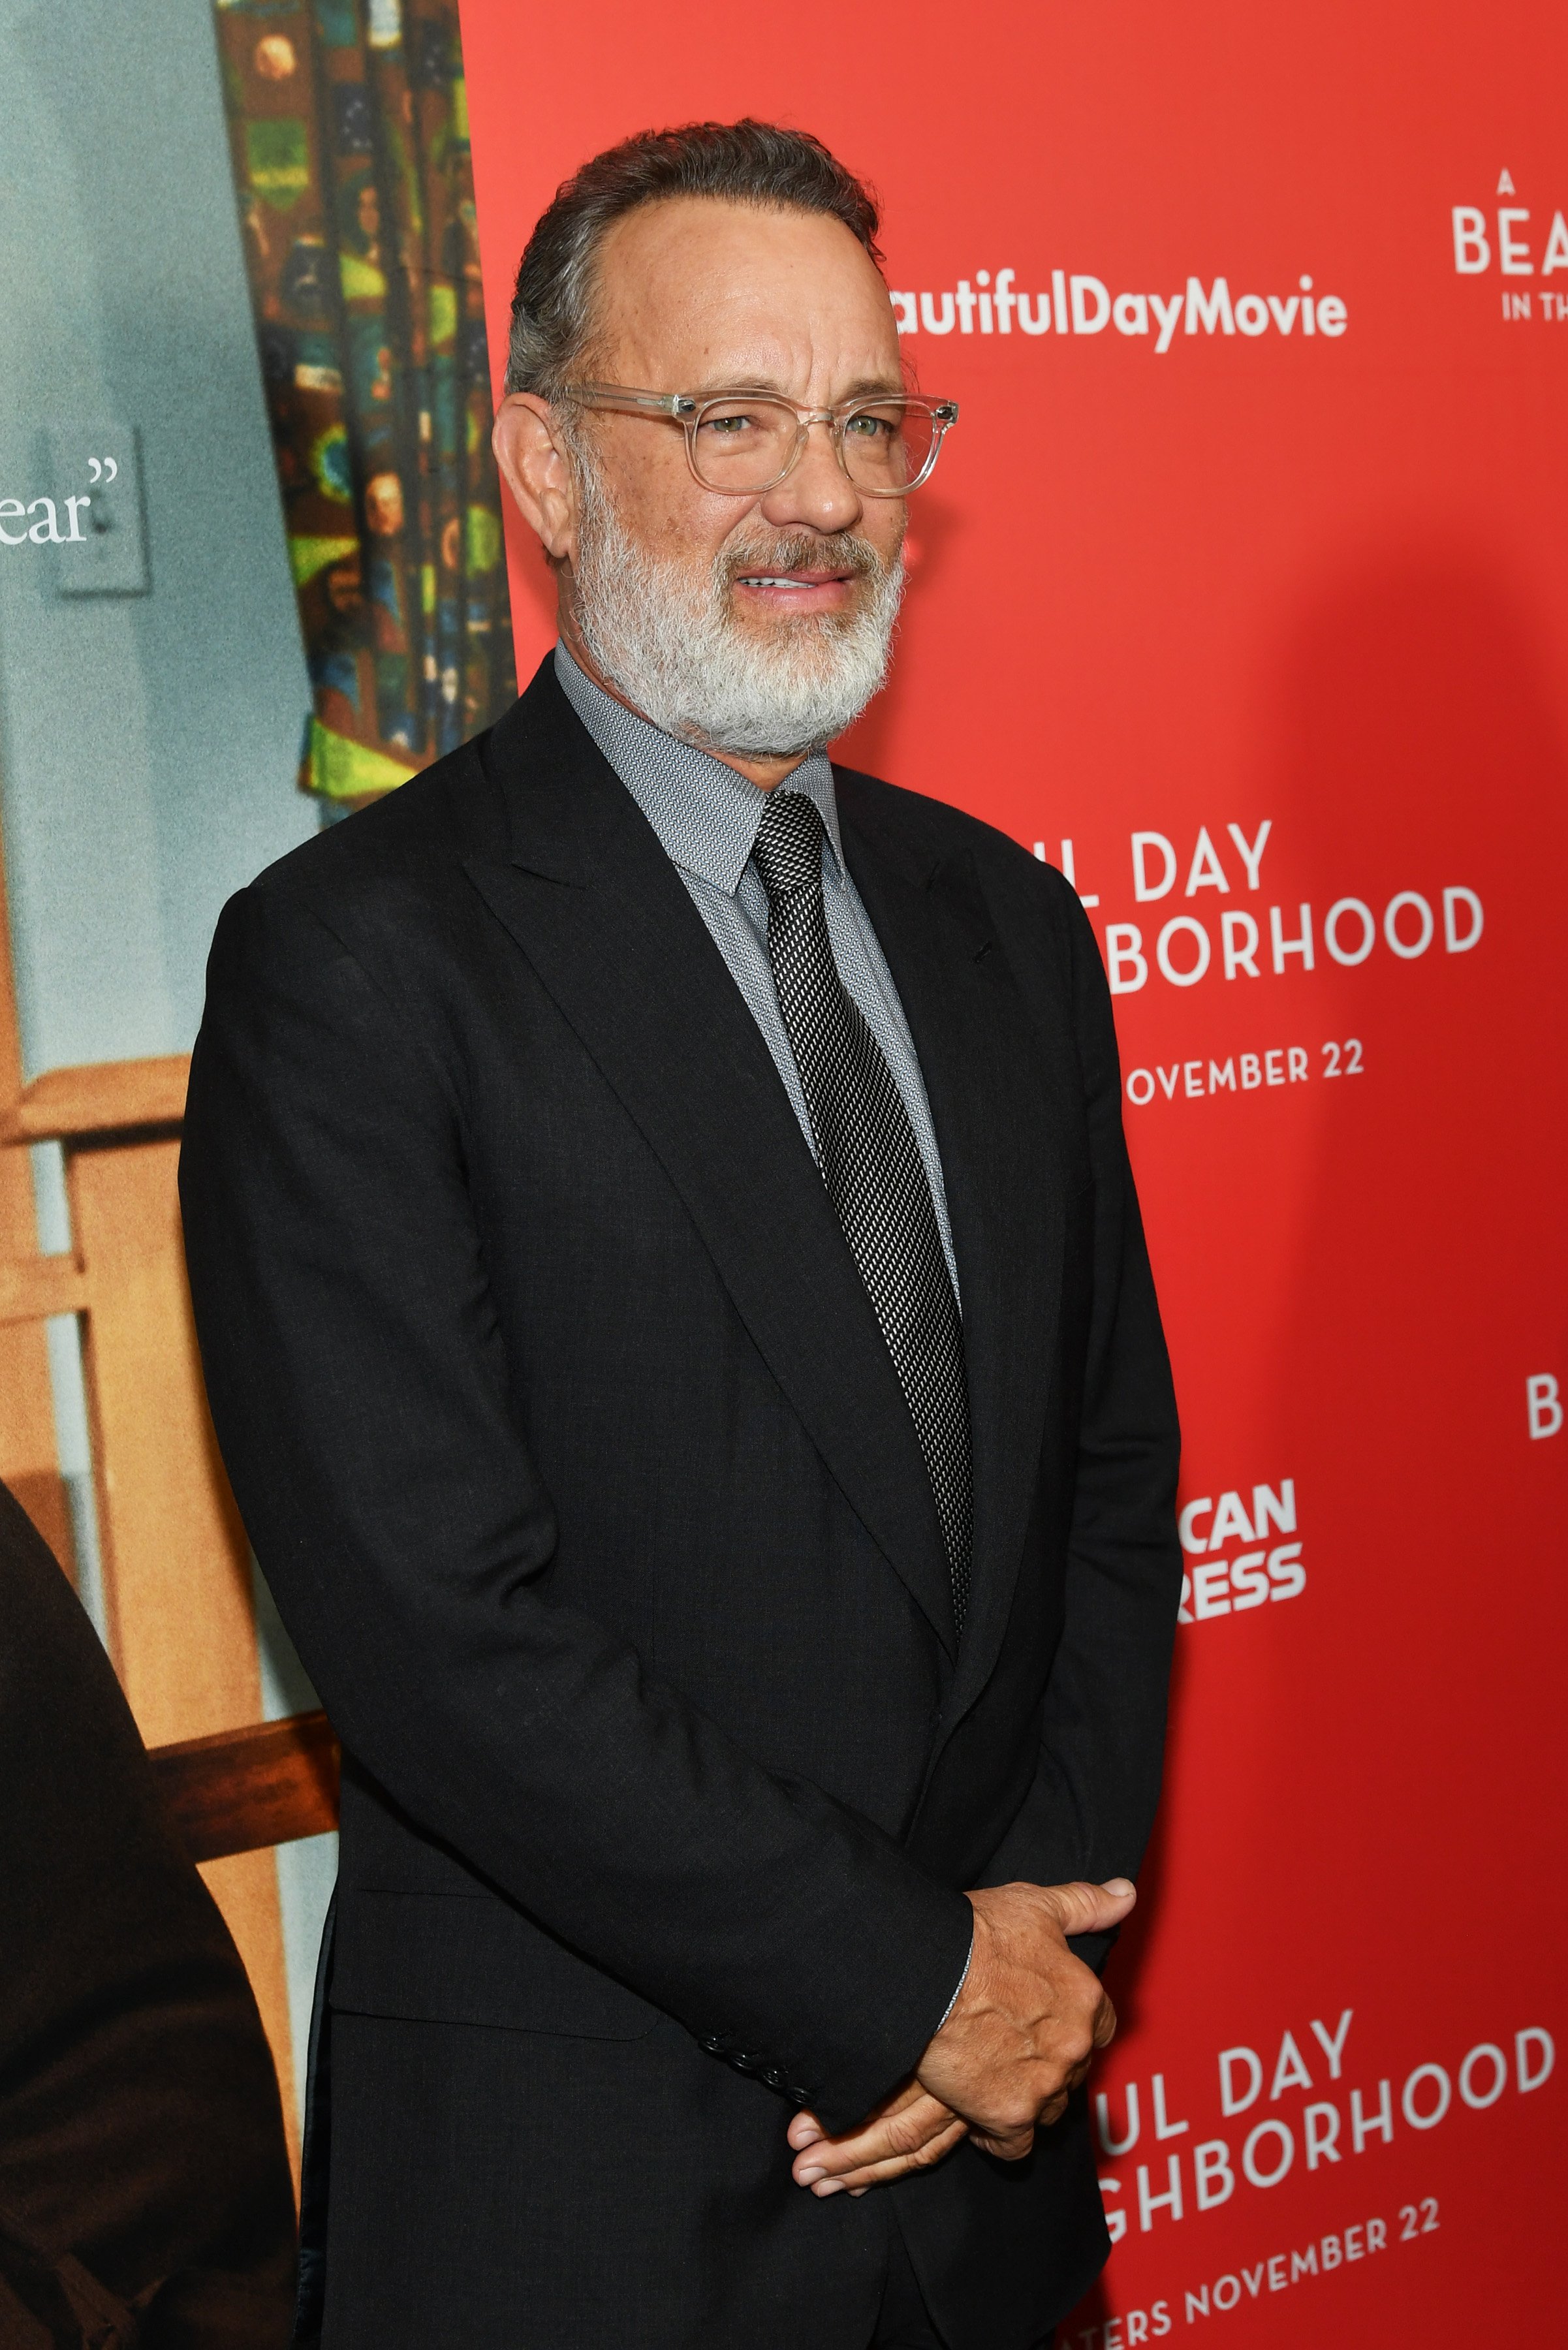 Tom Hanks attends "A Beautiful Day In The Neighborhood" New York Screening at Brookfield Place on November 17, 2019 in New York City. | Source: Getty Images